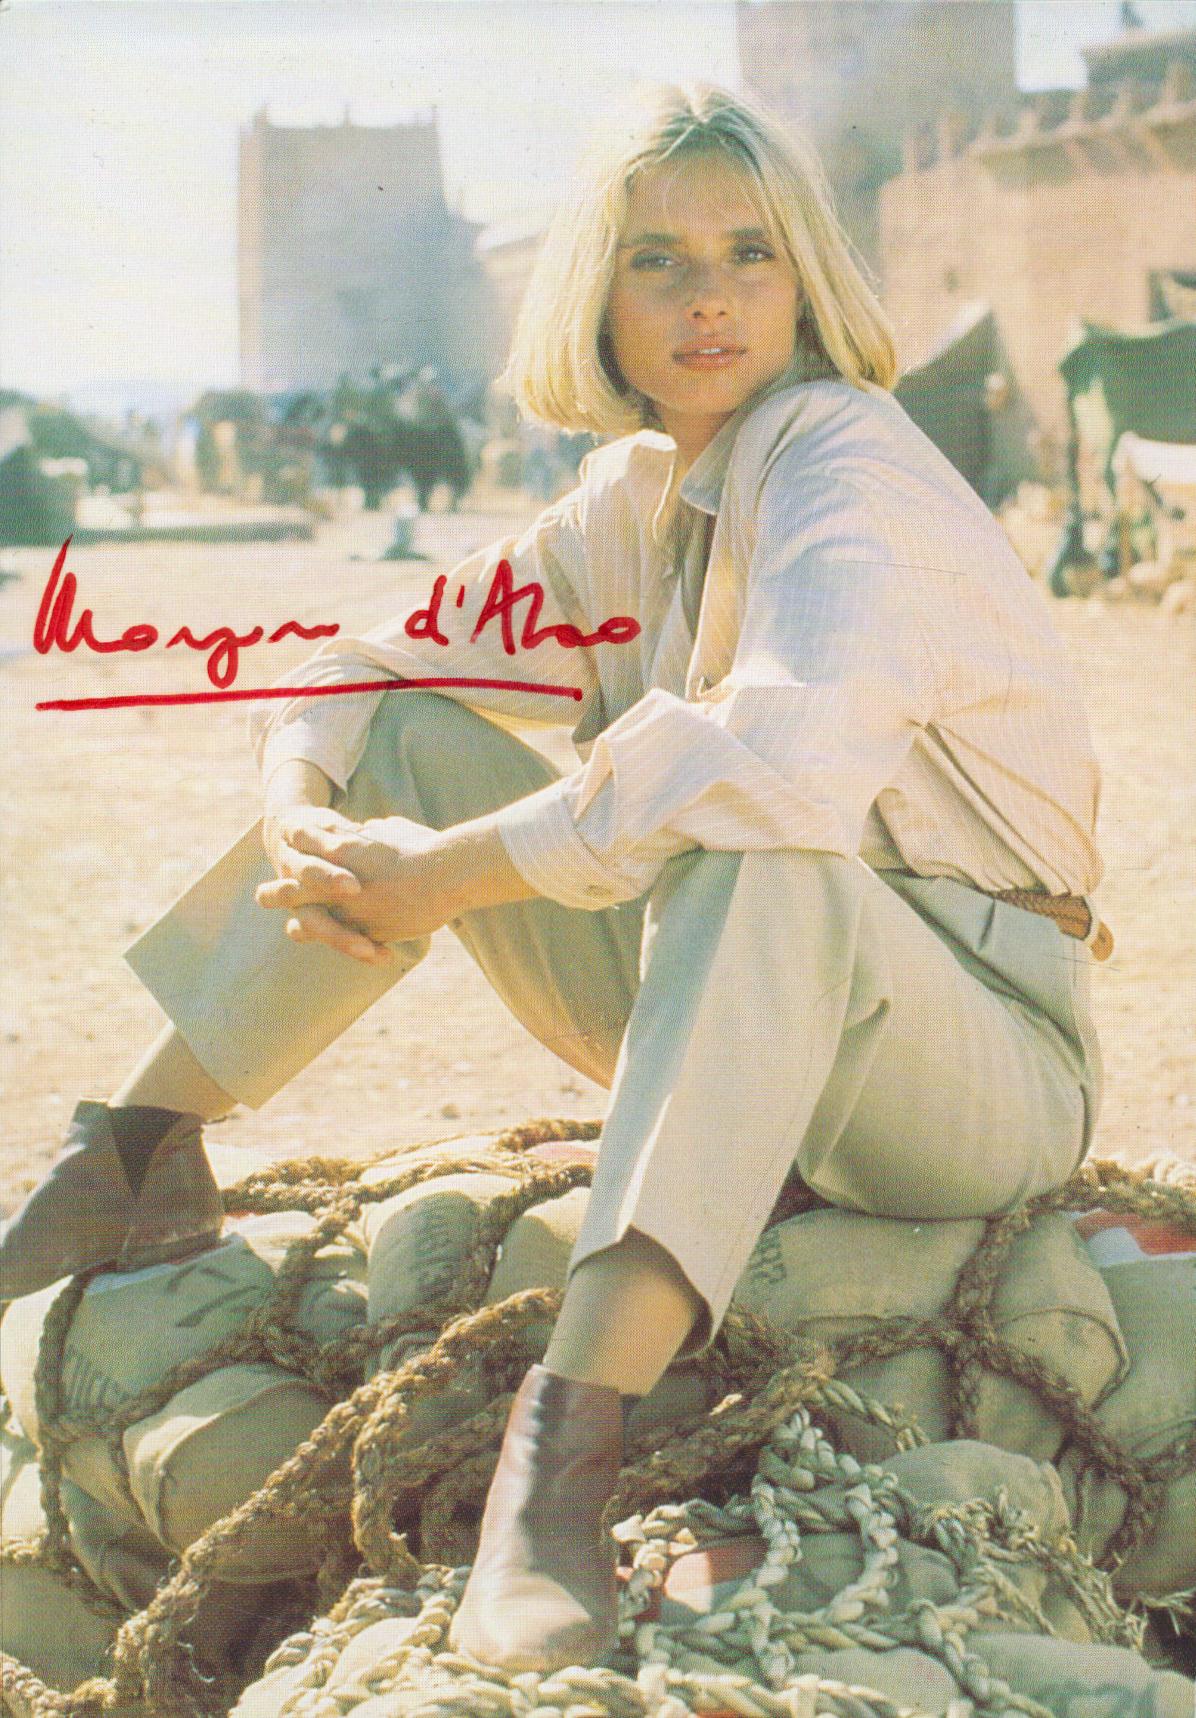 Maryam D'Abo James Bond actor signed 6 x 4 inch colour 007 postcard. British actress, best known